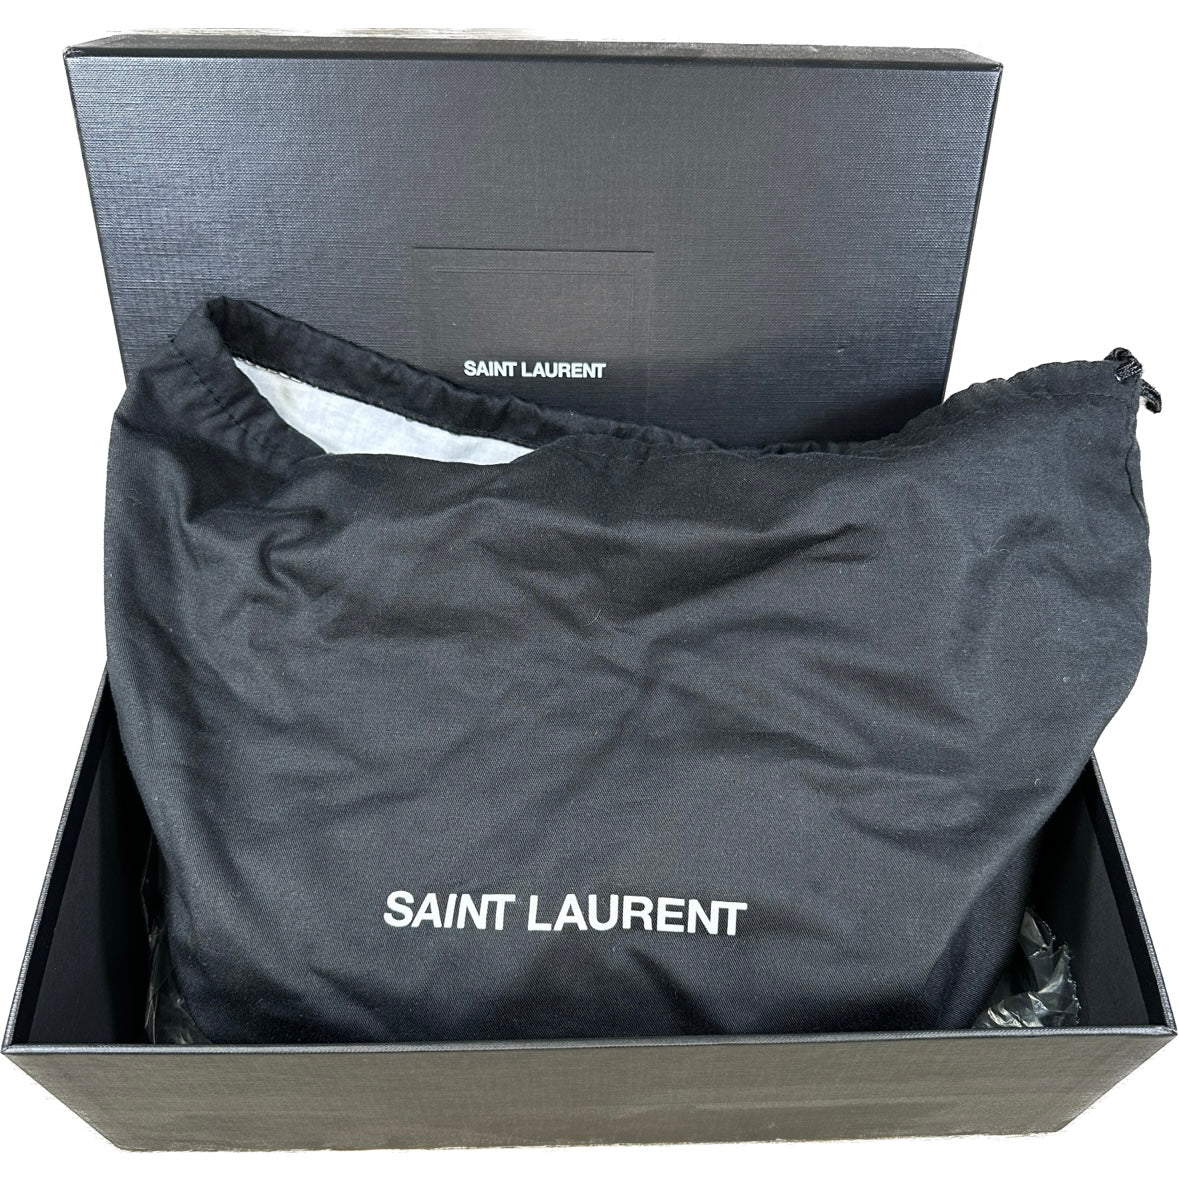 YSL Loulou Small Chain Bag in Quilted Y Leather – Chicago Pawners &  Jewelers